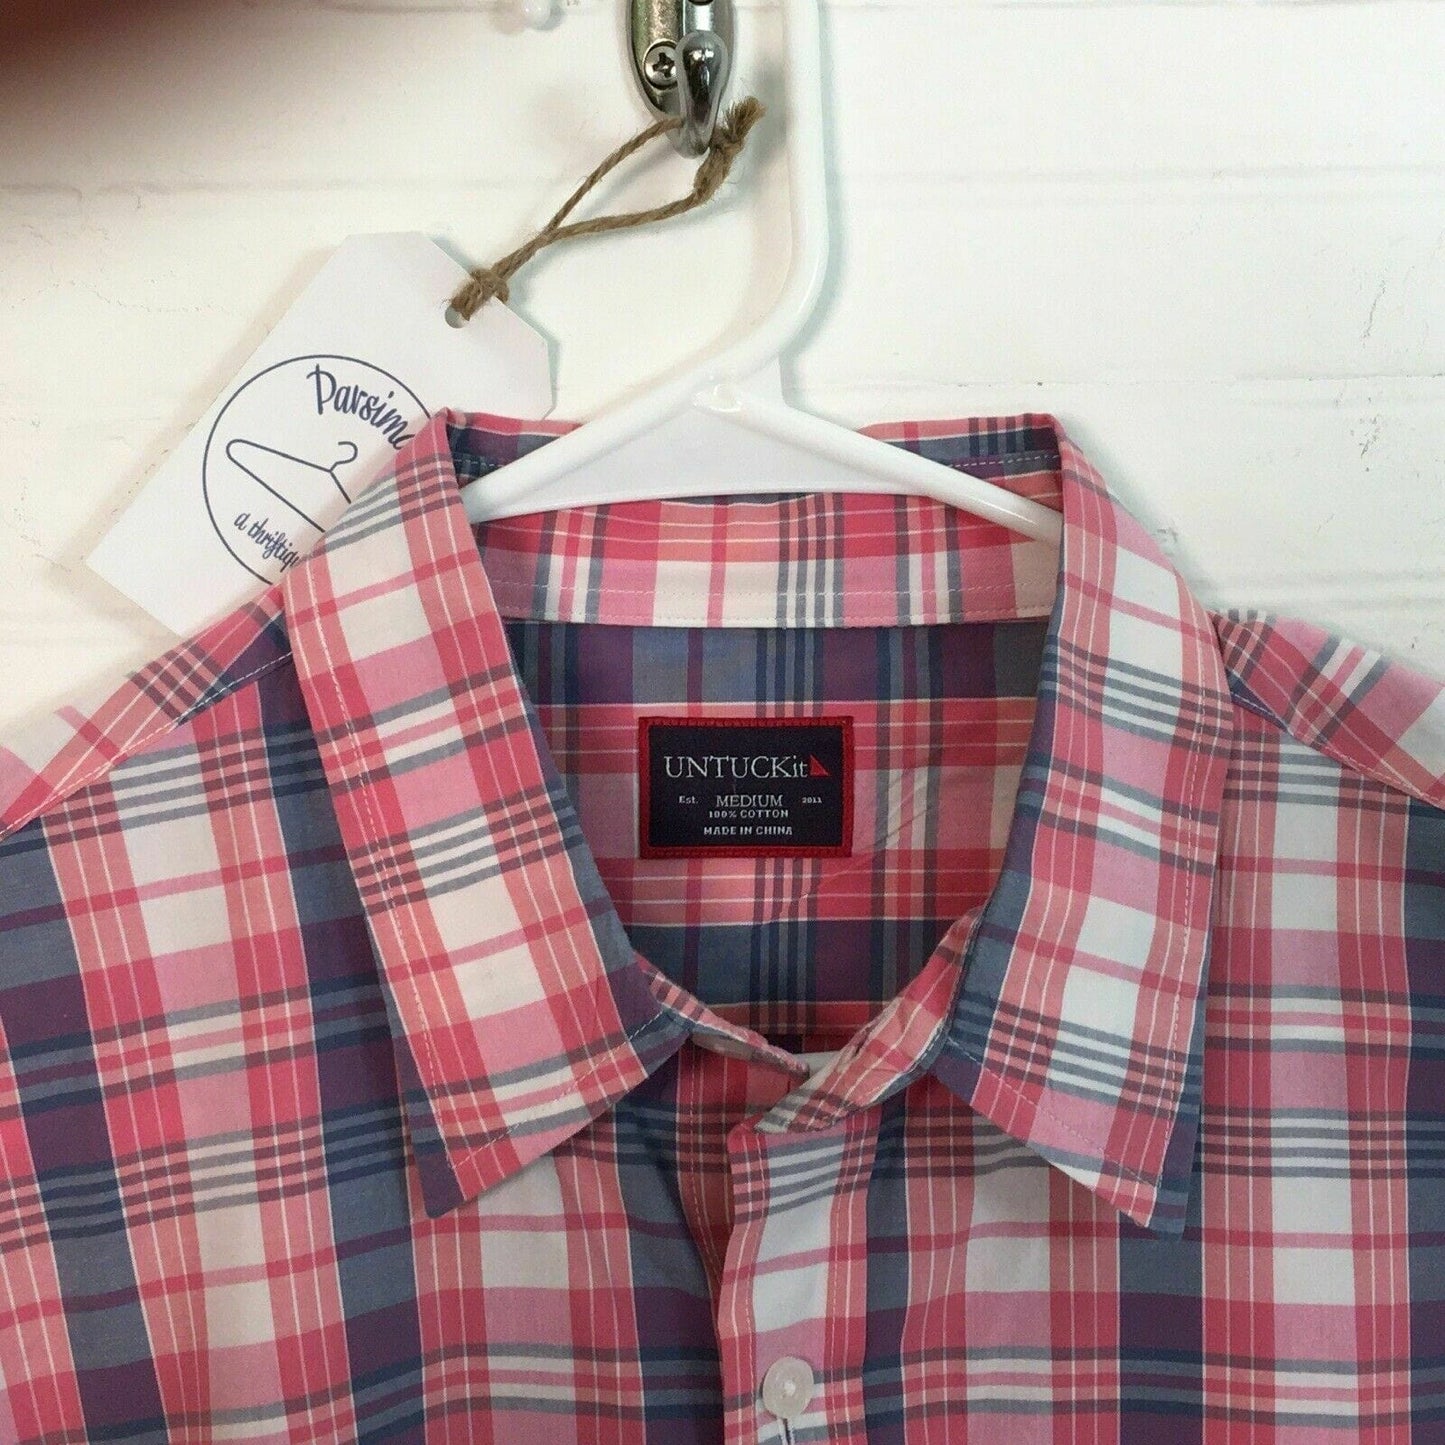 Sophisticated UNTUCKit Mens Button Up Shirt - Wrinkle Free - Size M - White/Pink Plaid